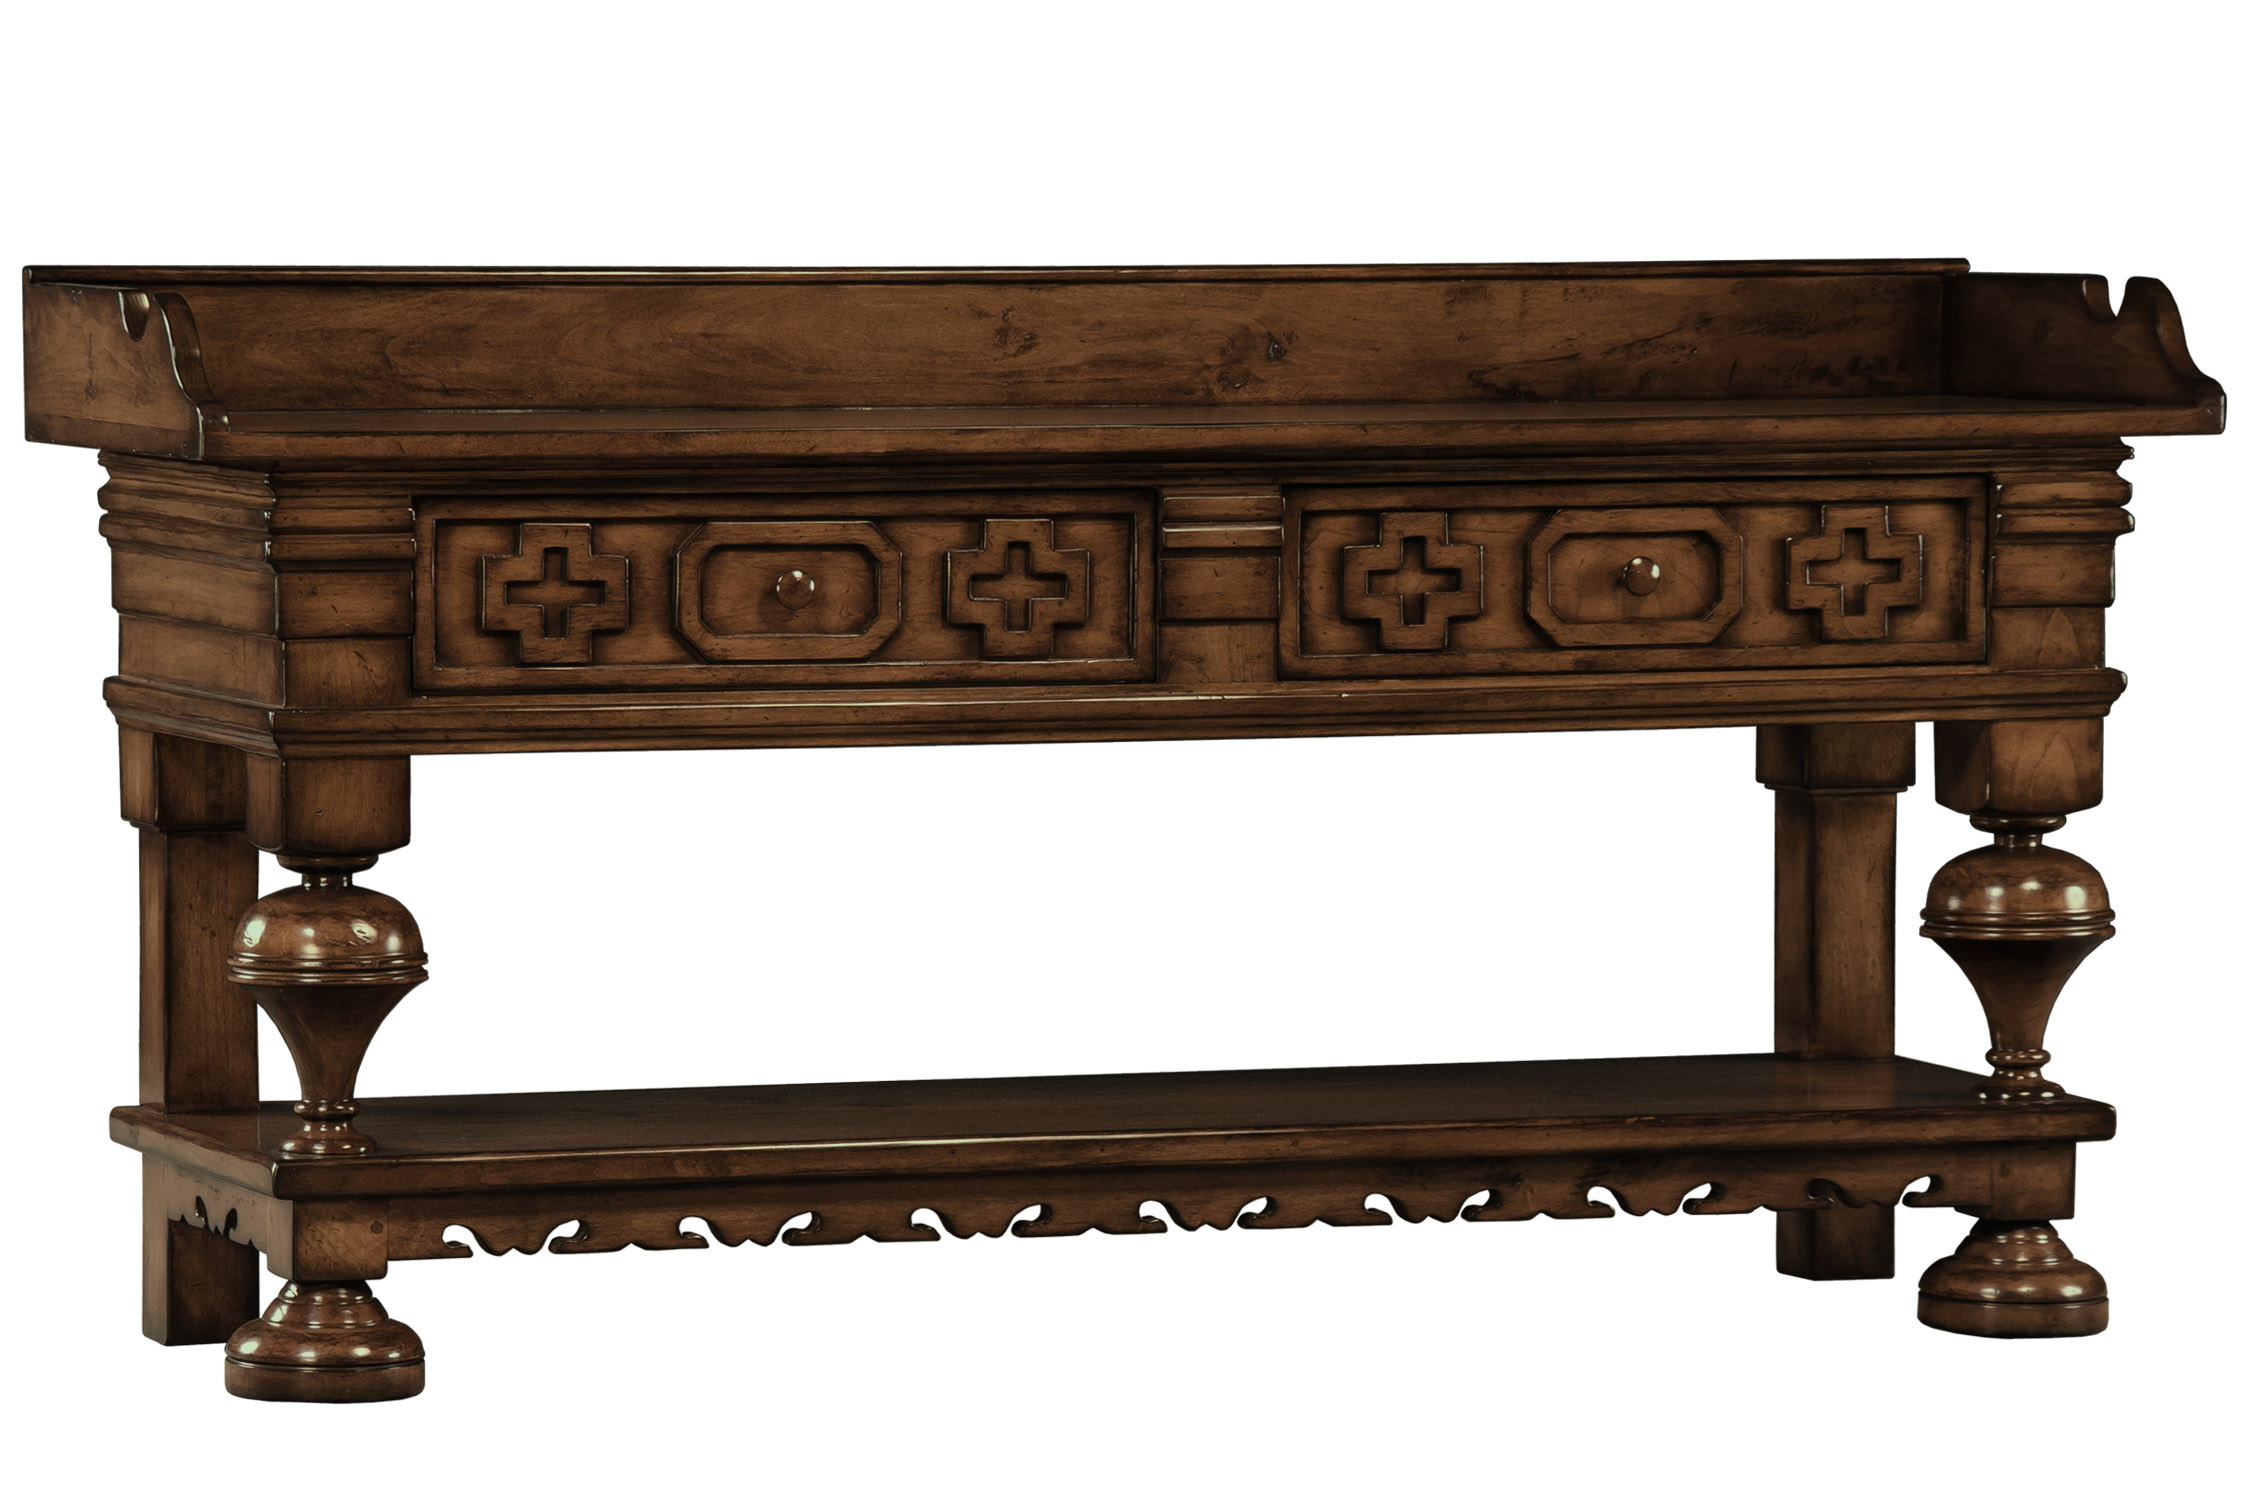 Logan decorative ornate console softa table with bottom shelf and two drawers by Woodland Furniture in Idaho Falls